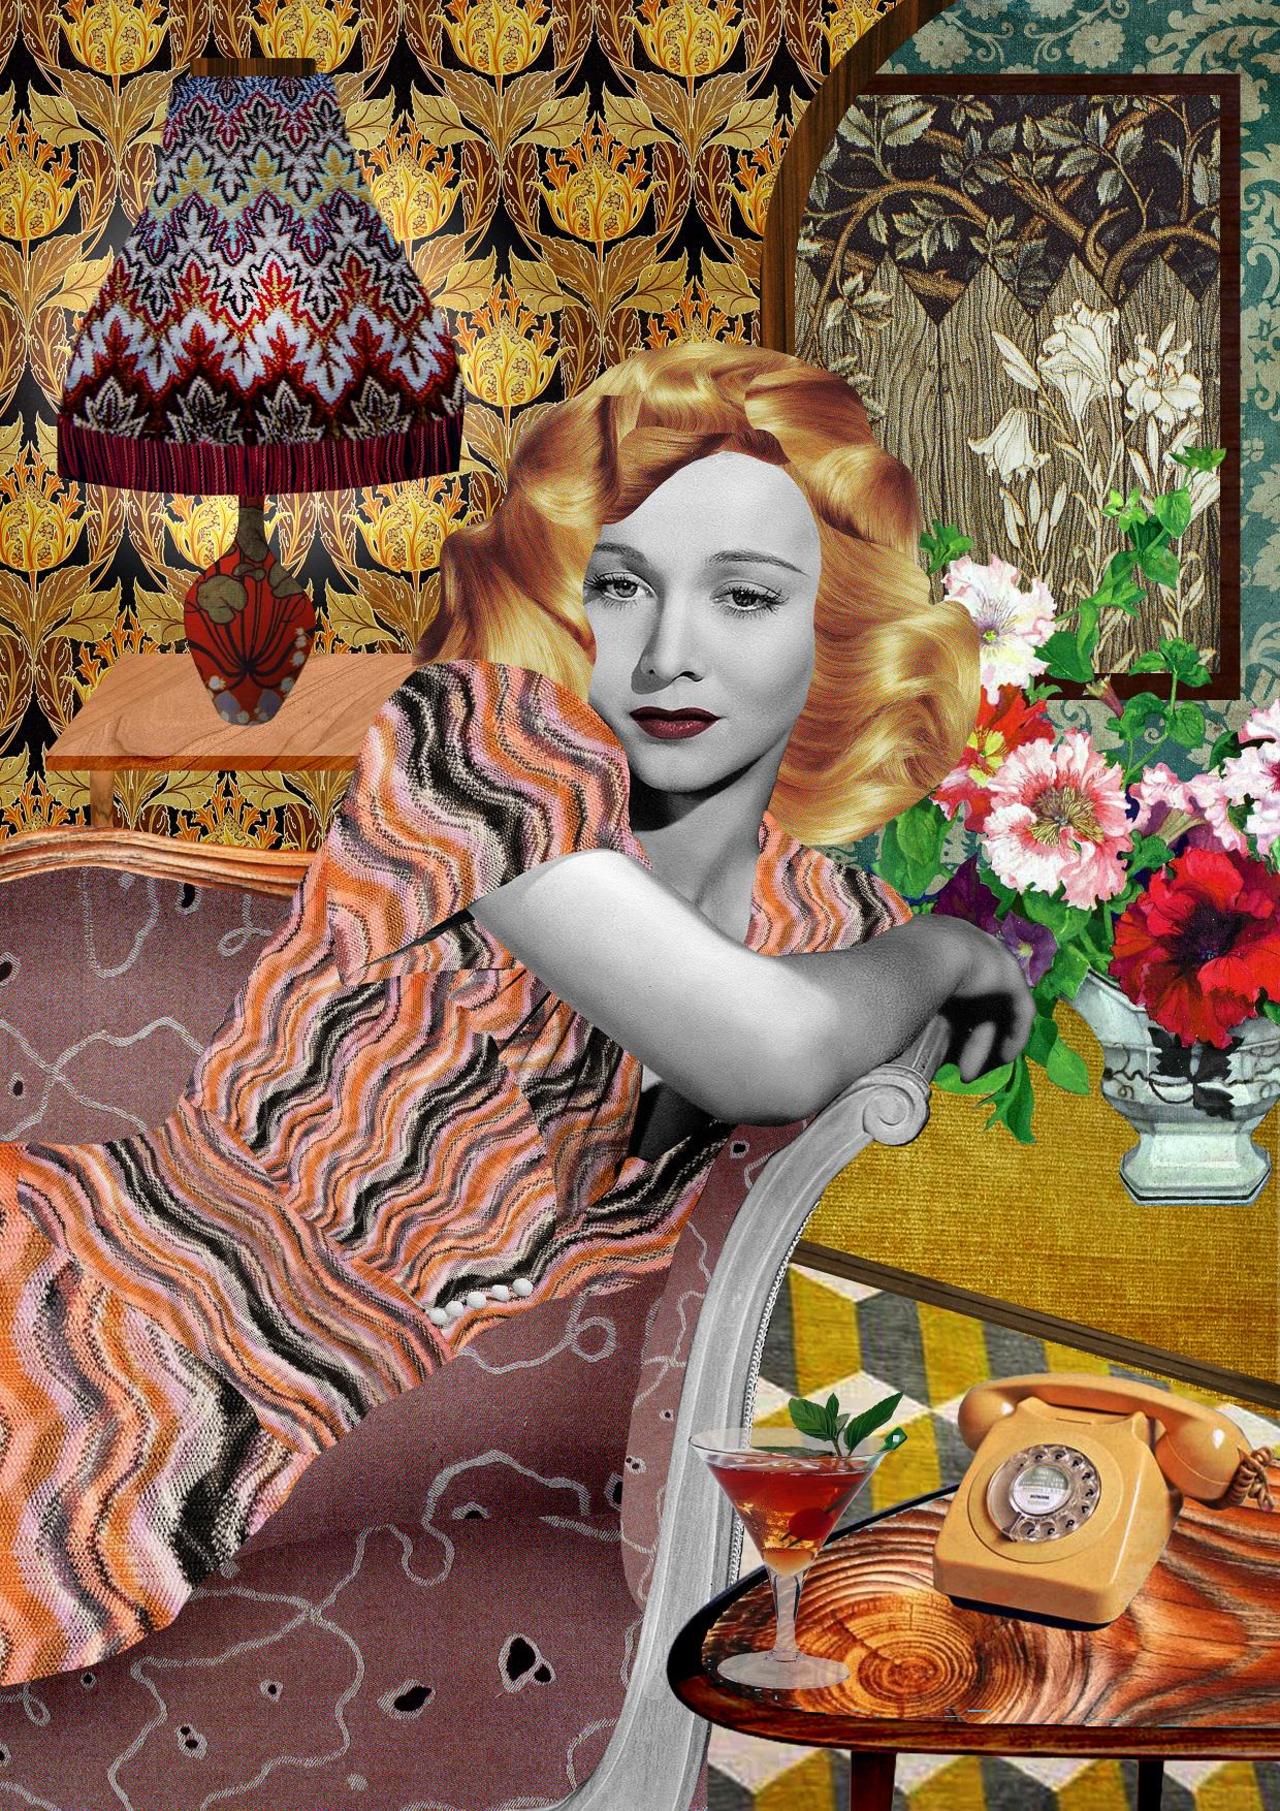 Housewives by Berlin artist Kathrin Kuhn. #collage #art https://themakerandthemuse.wordpress.com/2015/03/31/kathrin-kuhn/ http://t.co/pxZcdpcBW5